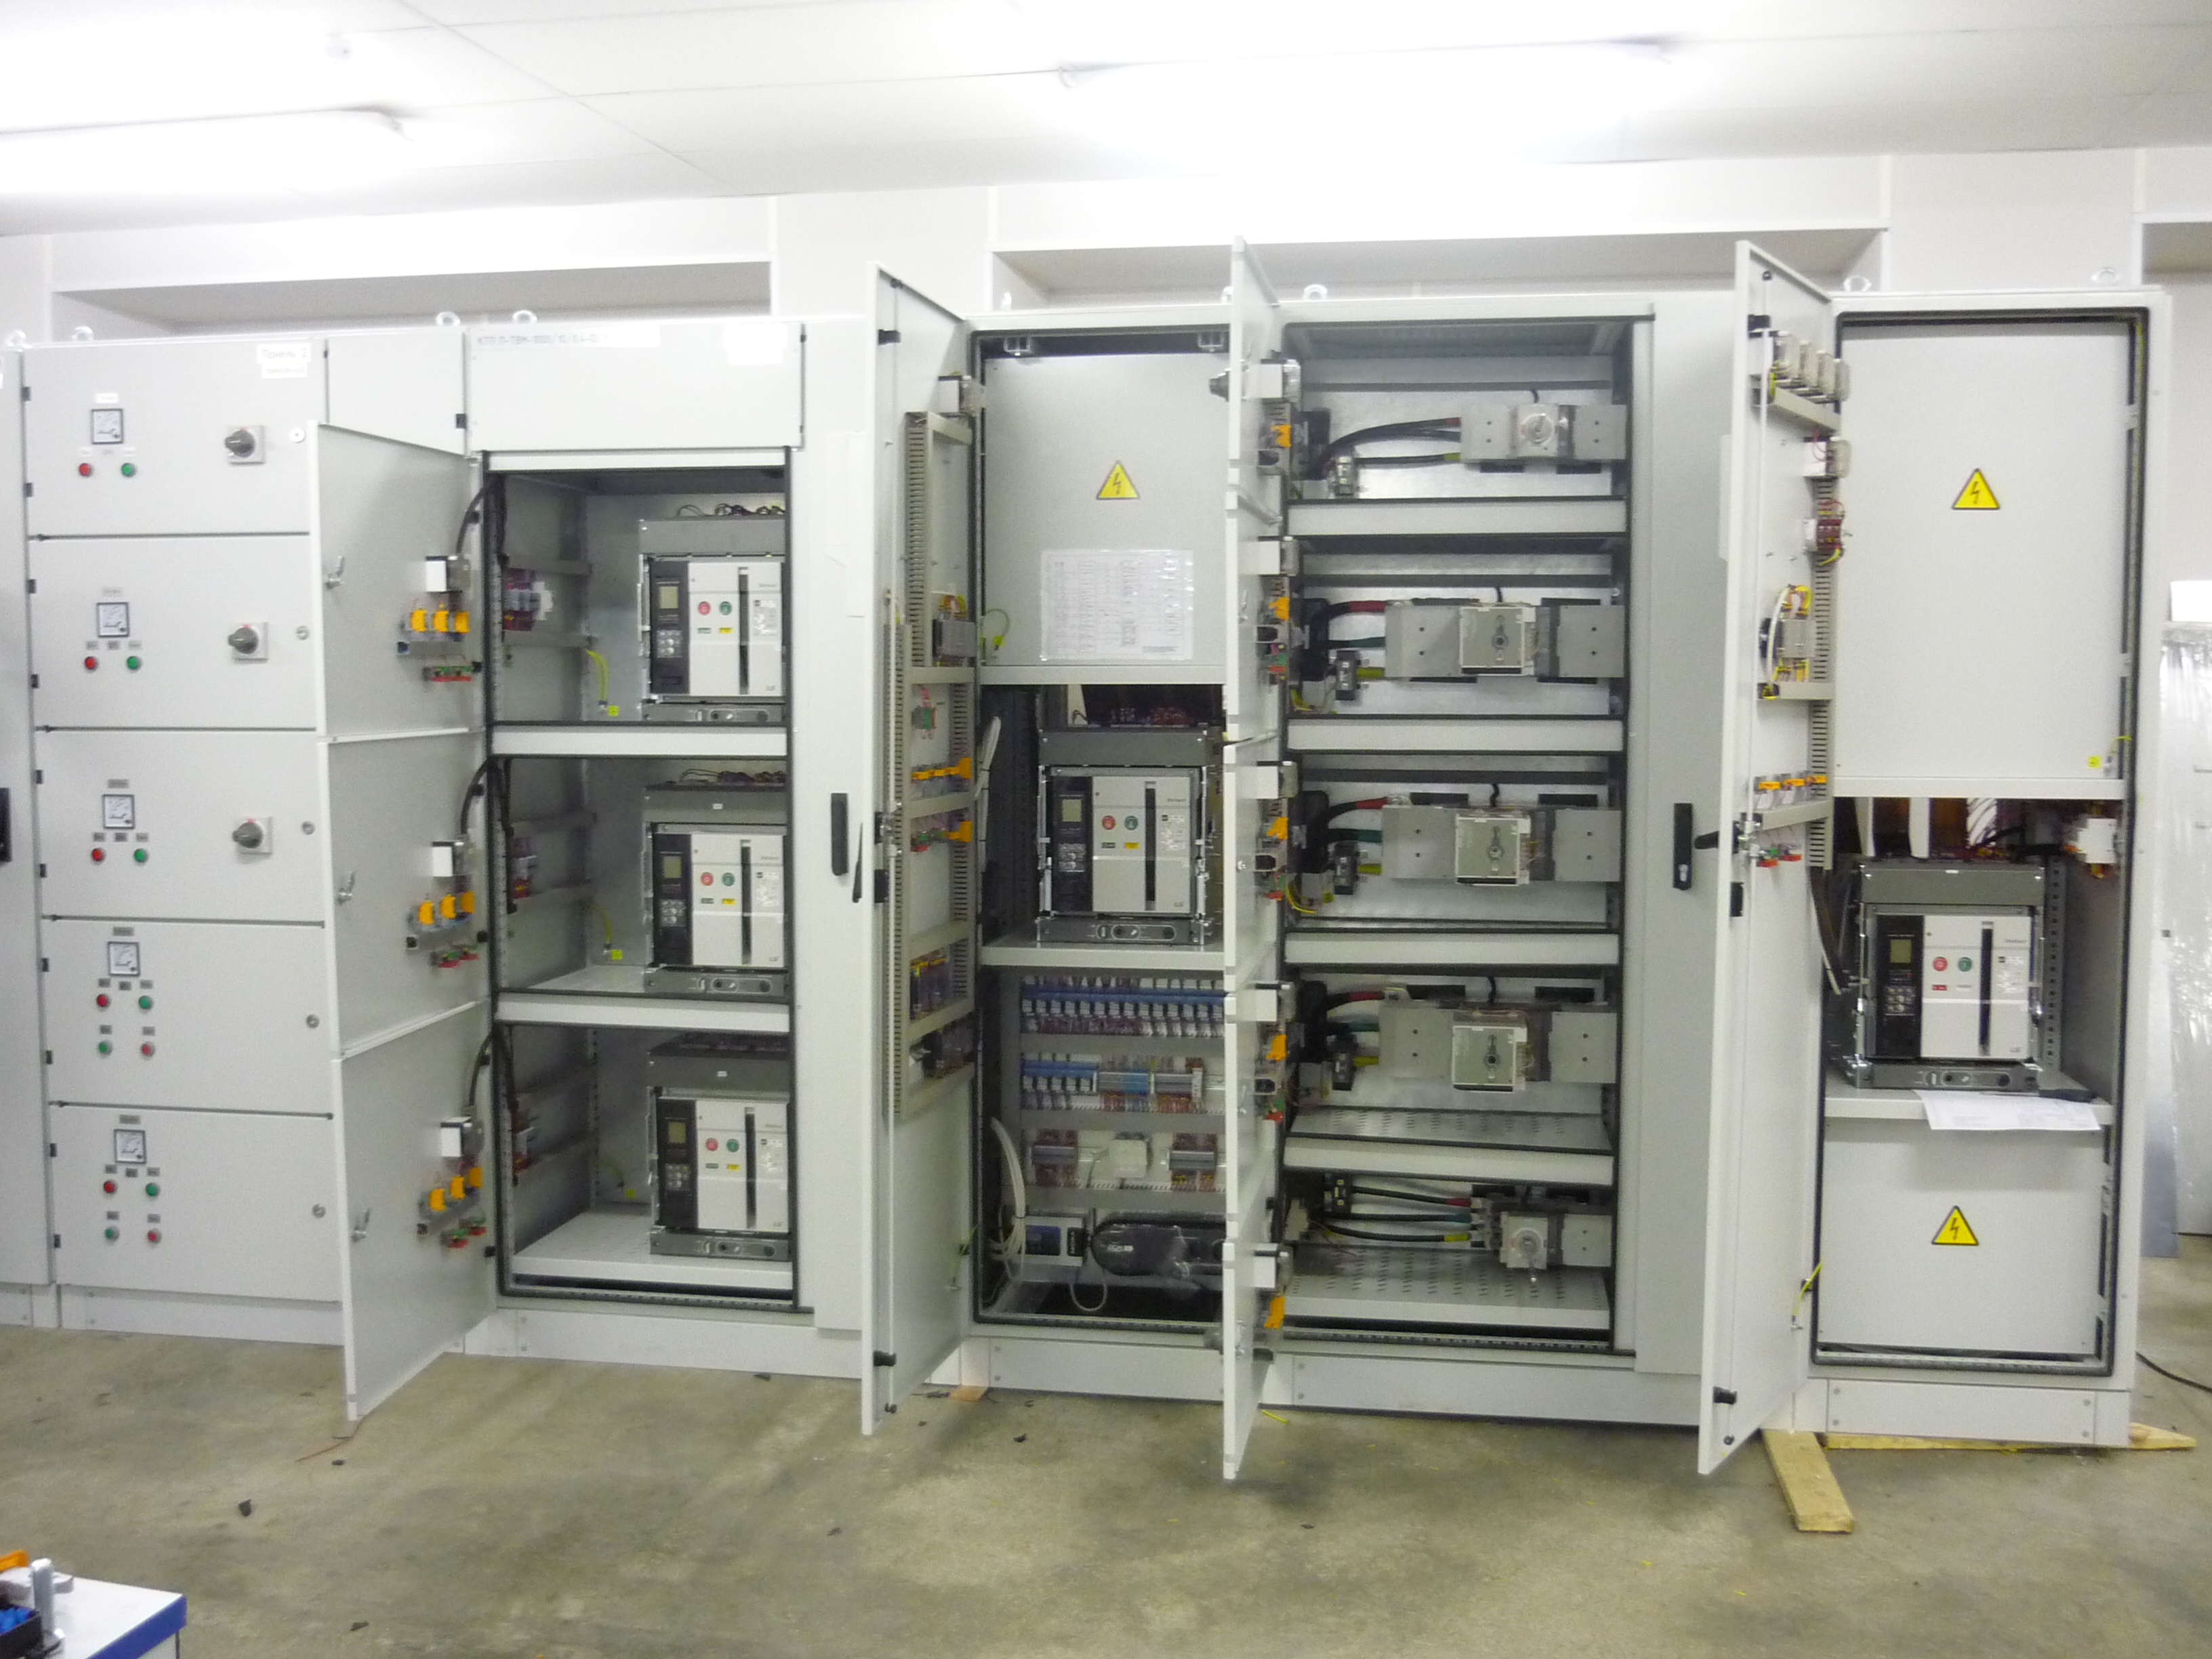 Production of transformer substations and panel products